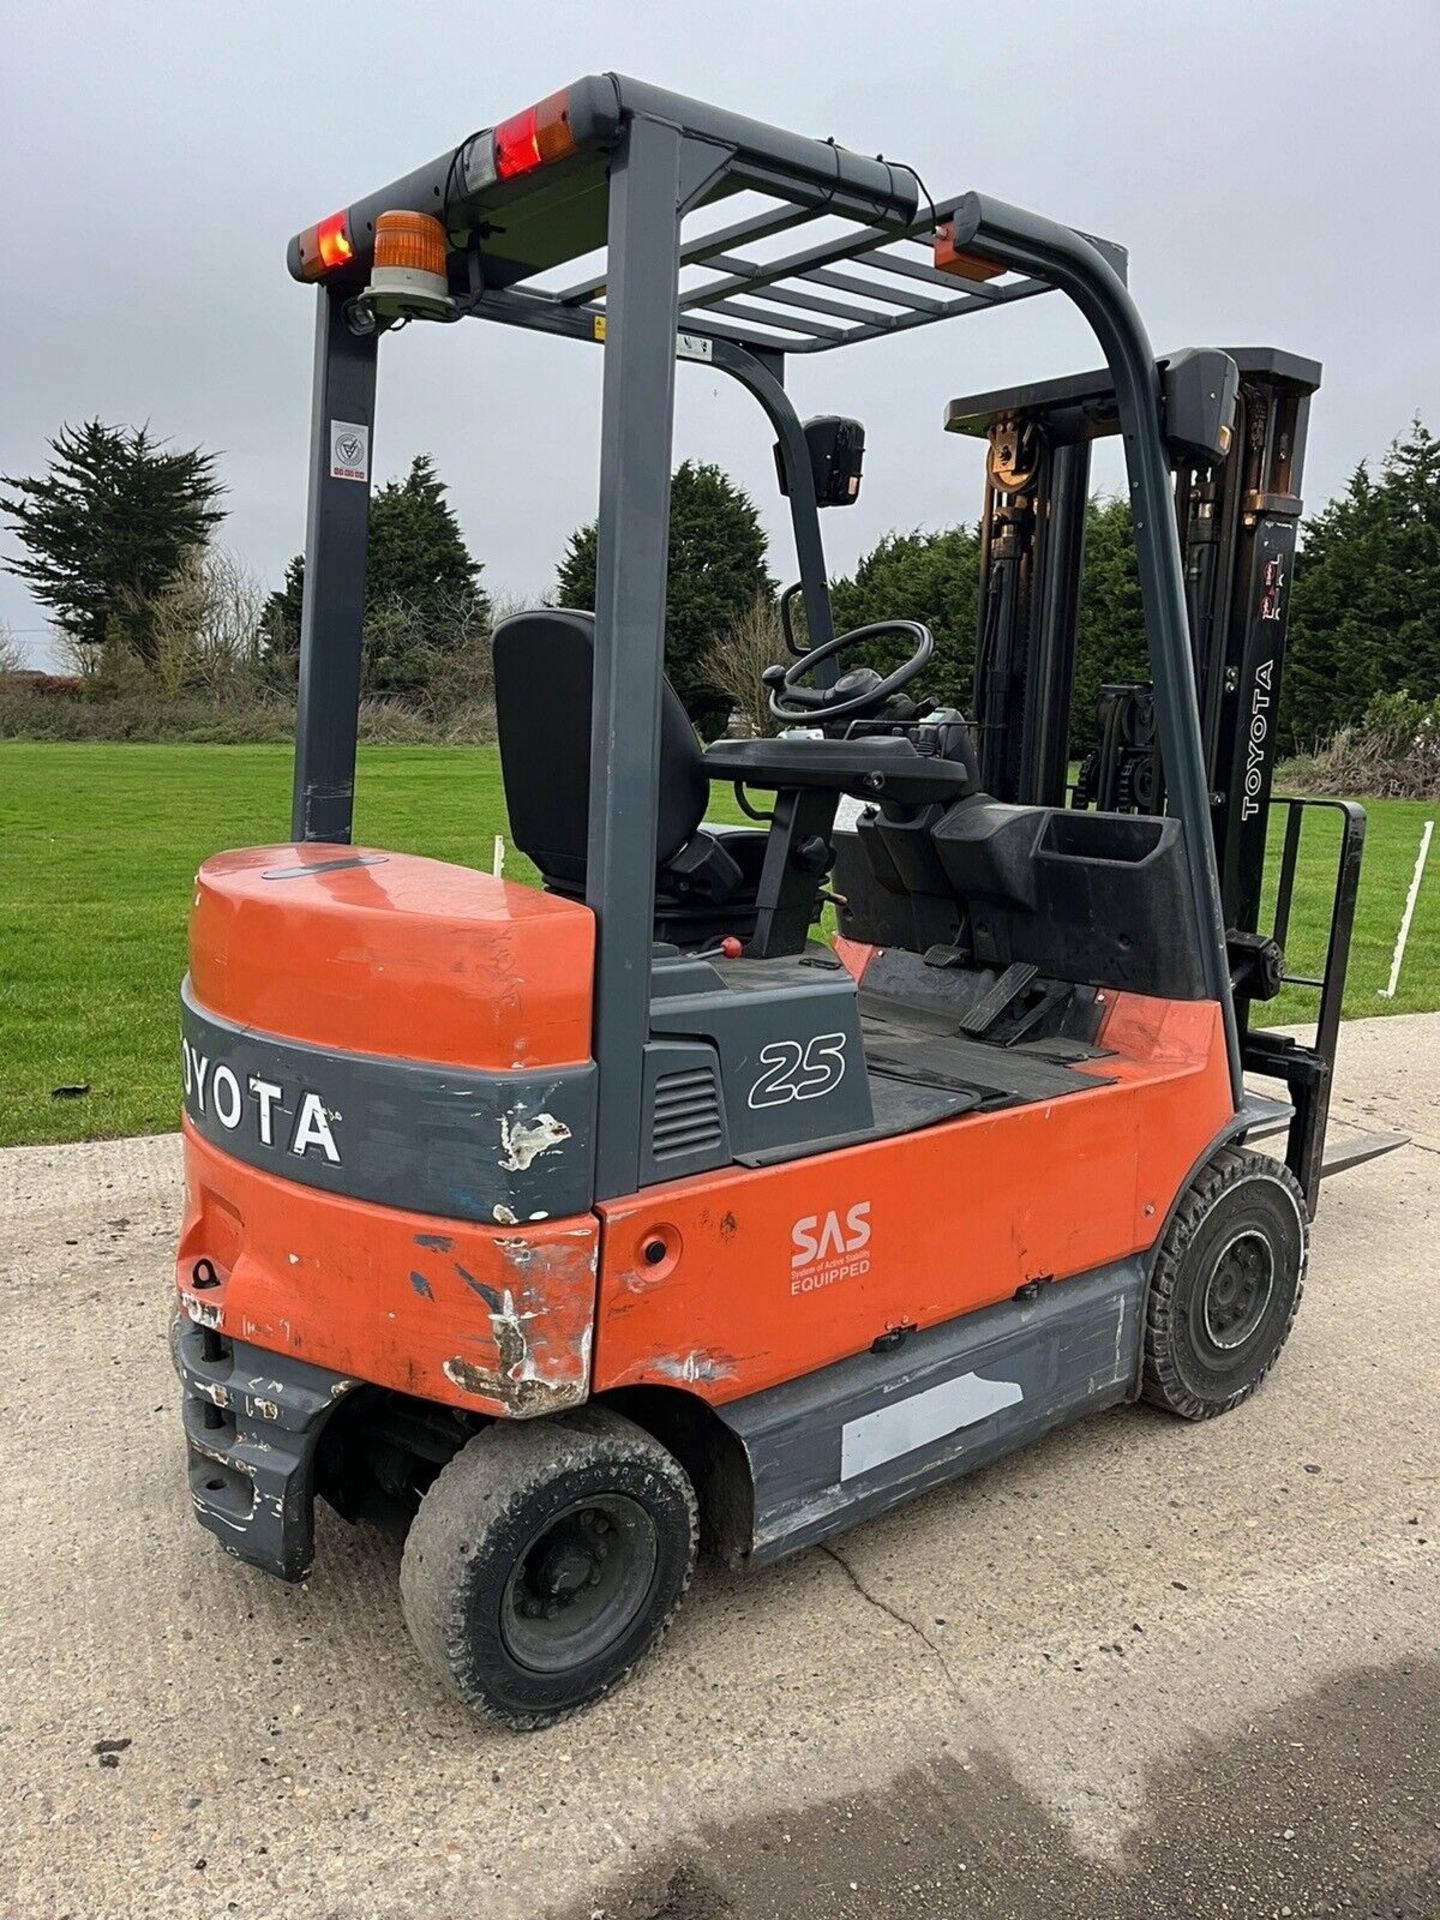 TOYOTA 2.5 Tonne (Container Spec) Electric Forklift Truck - Image 4 of 7